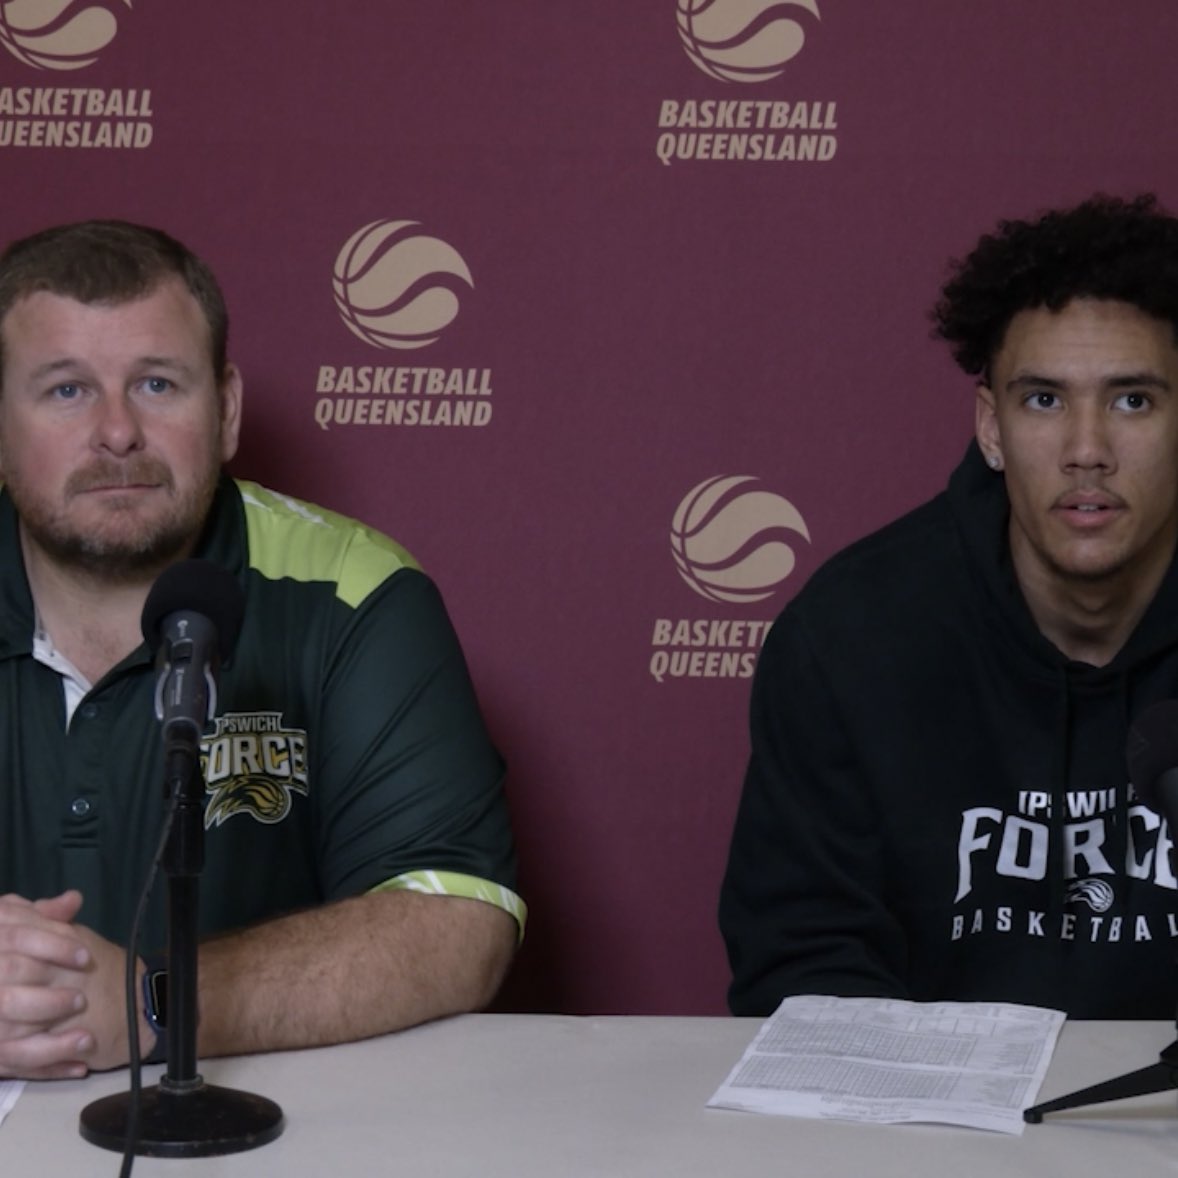 𝗡𝗕𝗟𝟭 𝗡𝗼𝗿𝘁𝗵 𝗠𝗲𝗻’𝘀 𝗣𝗿𝗲𝘀𝘀 𝗖𝗼𝗻𝗳𝗲𝗿𝗲𝗻𝗰𝗲𝘀 🎙️ Watch the FULL press conferences from Game 1 of the @NBL1 North Men’s GF Series, w/ Jason Cadee & Anthony Petrie from @GoldCoastBBall, and Chris Riches & Jaylin Galloway from Ipswich. 📺 fb.watch/mdv7tA7MGN/?mi…